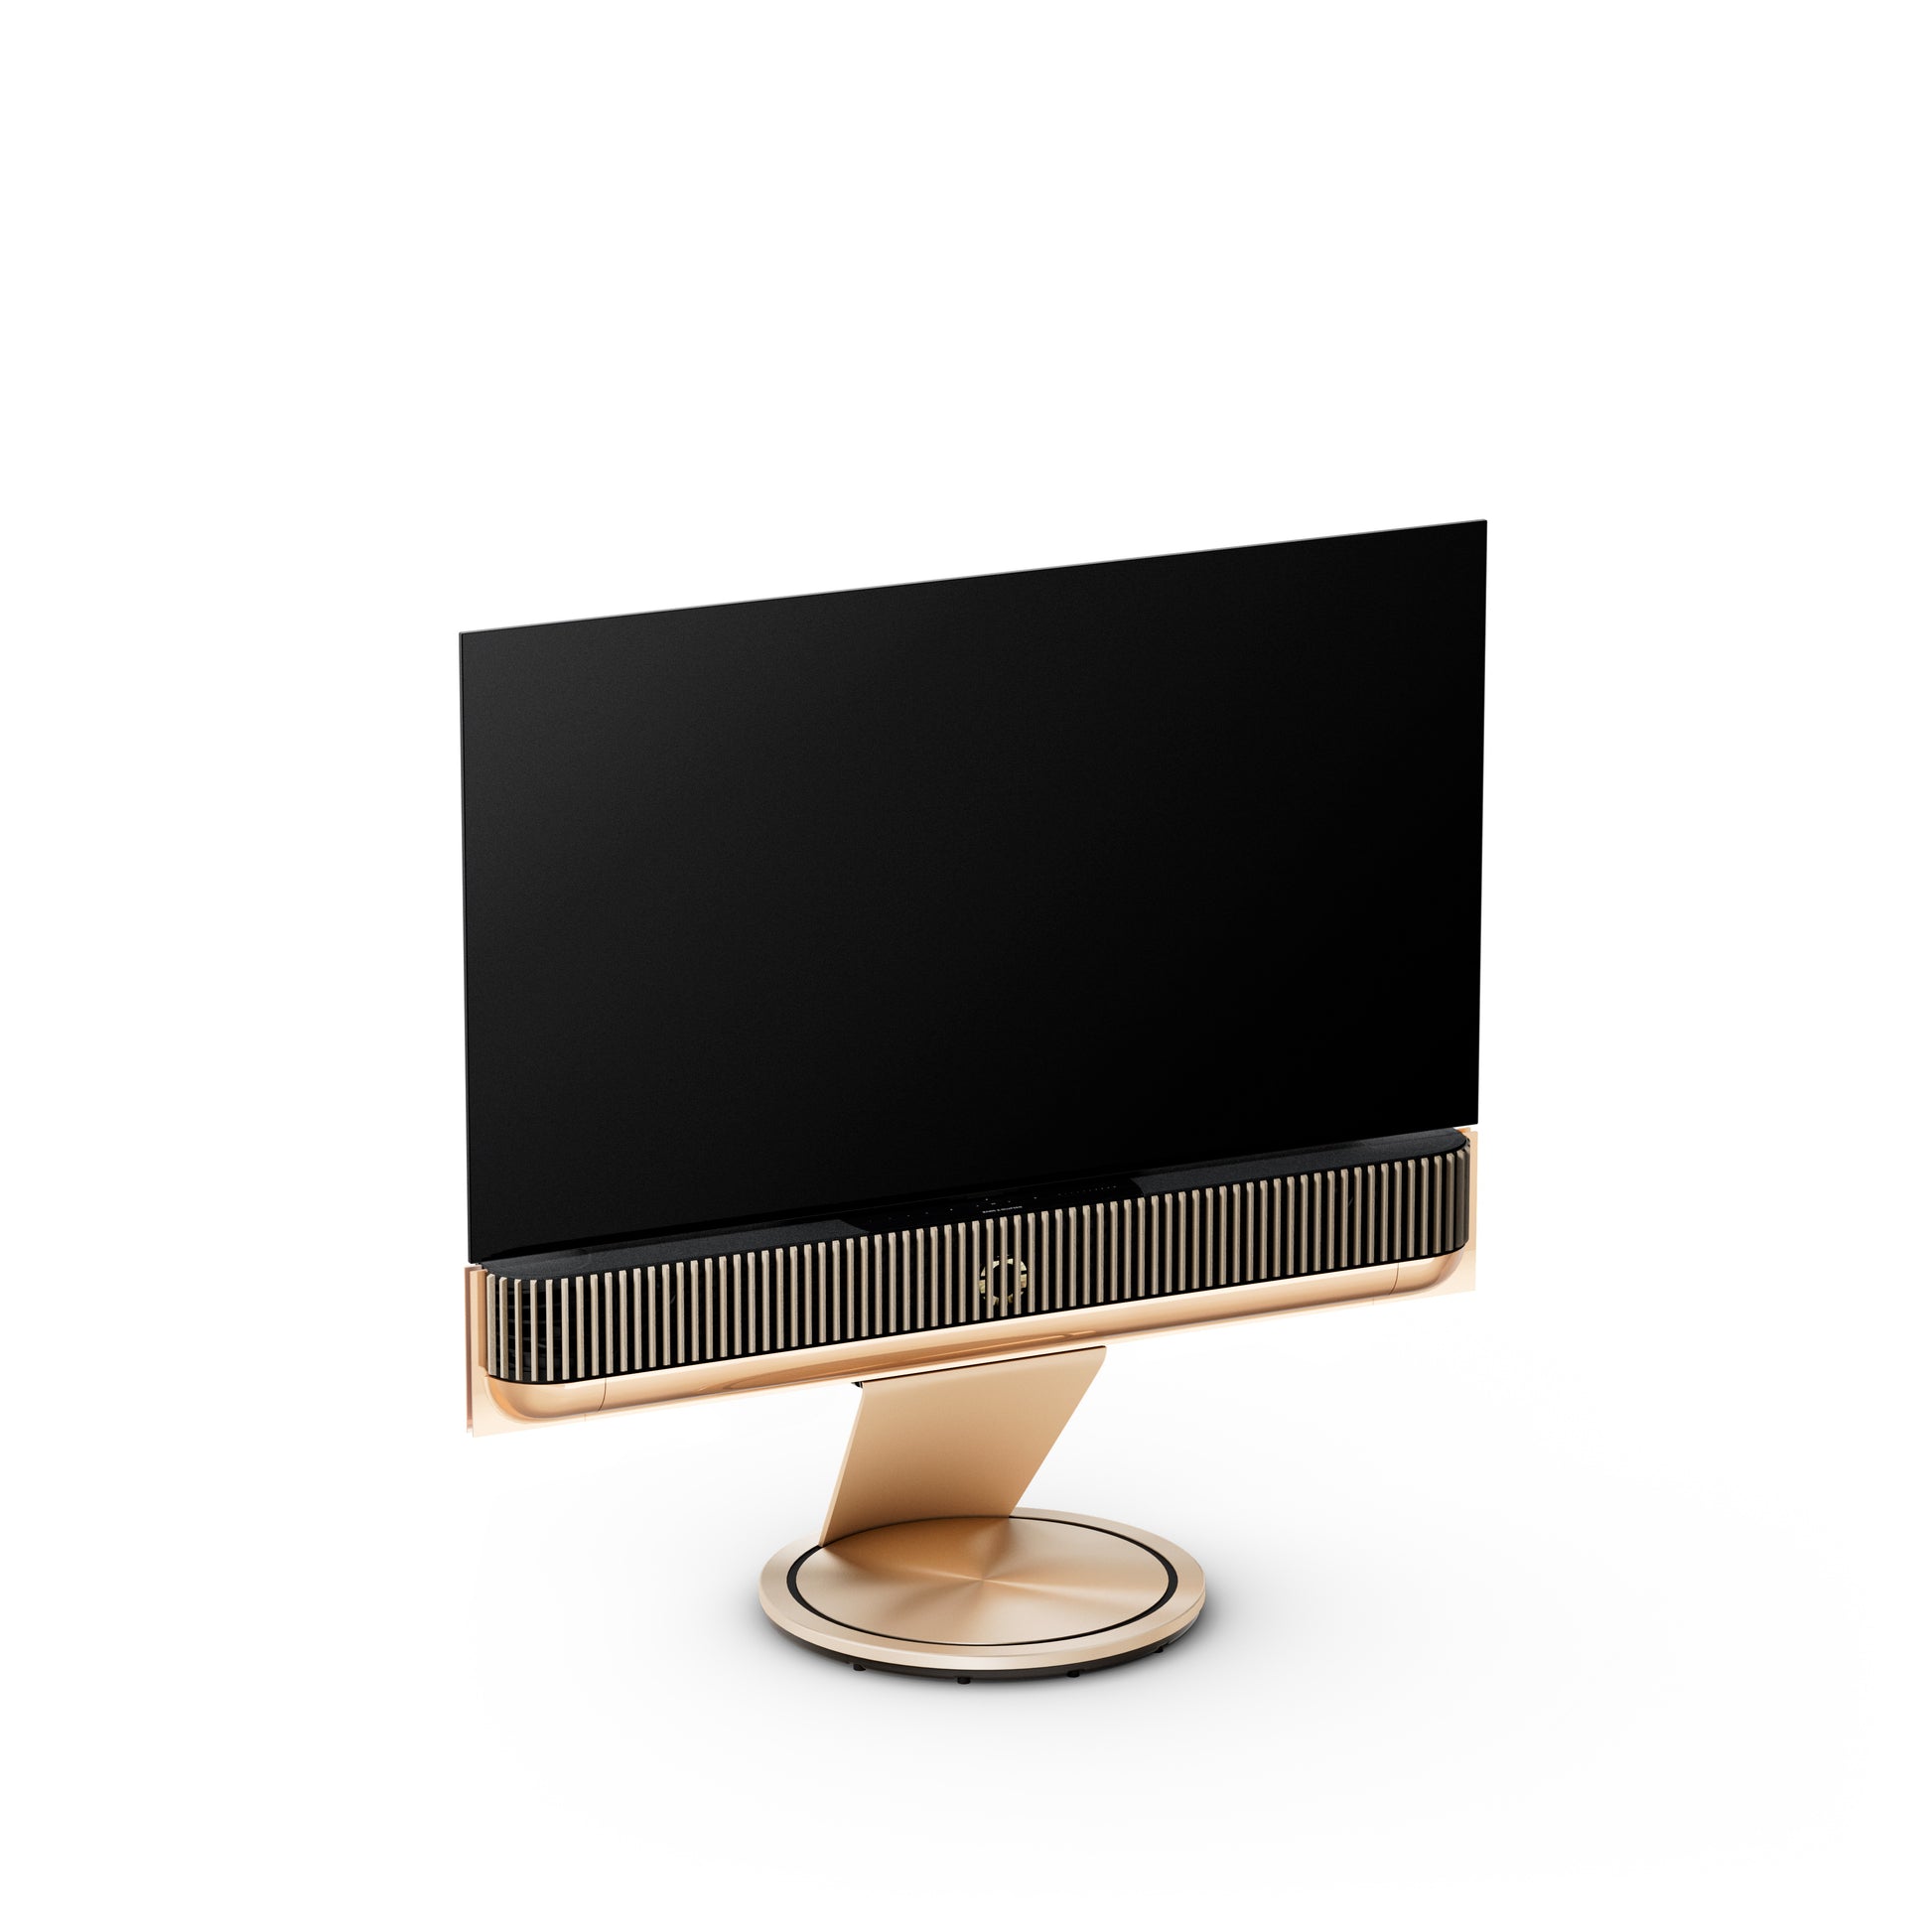 BeoSound Theatre in gold tone as TV in 55 inches with cover in light oak on floor stand